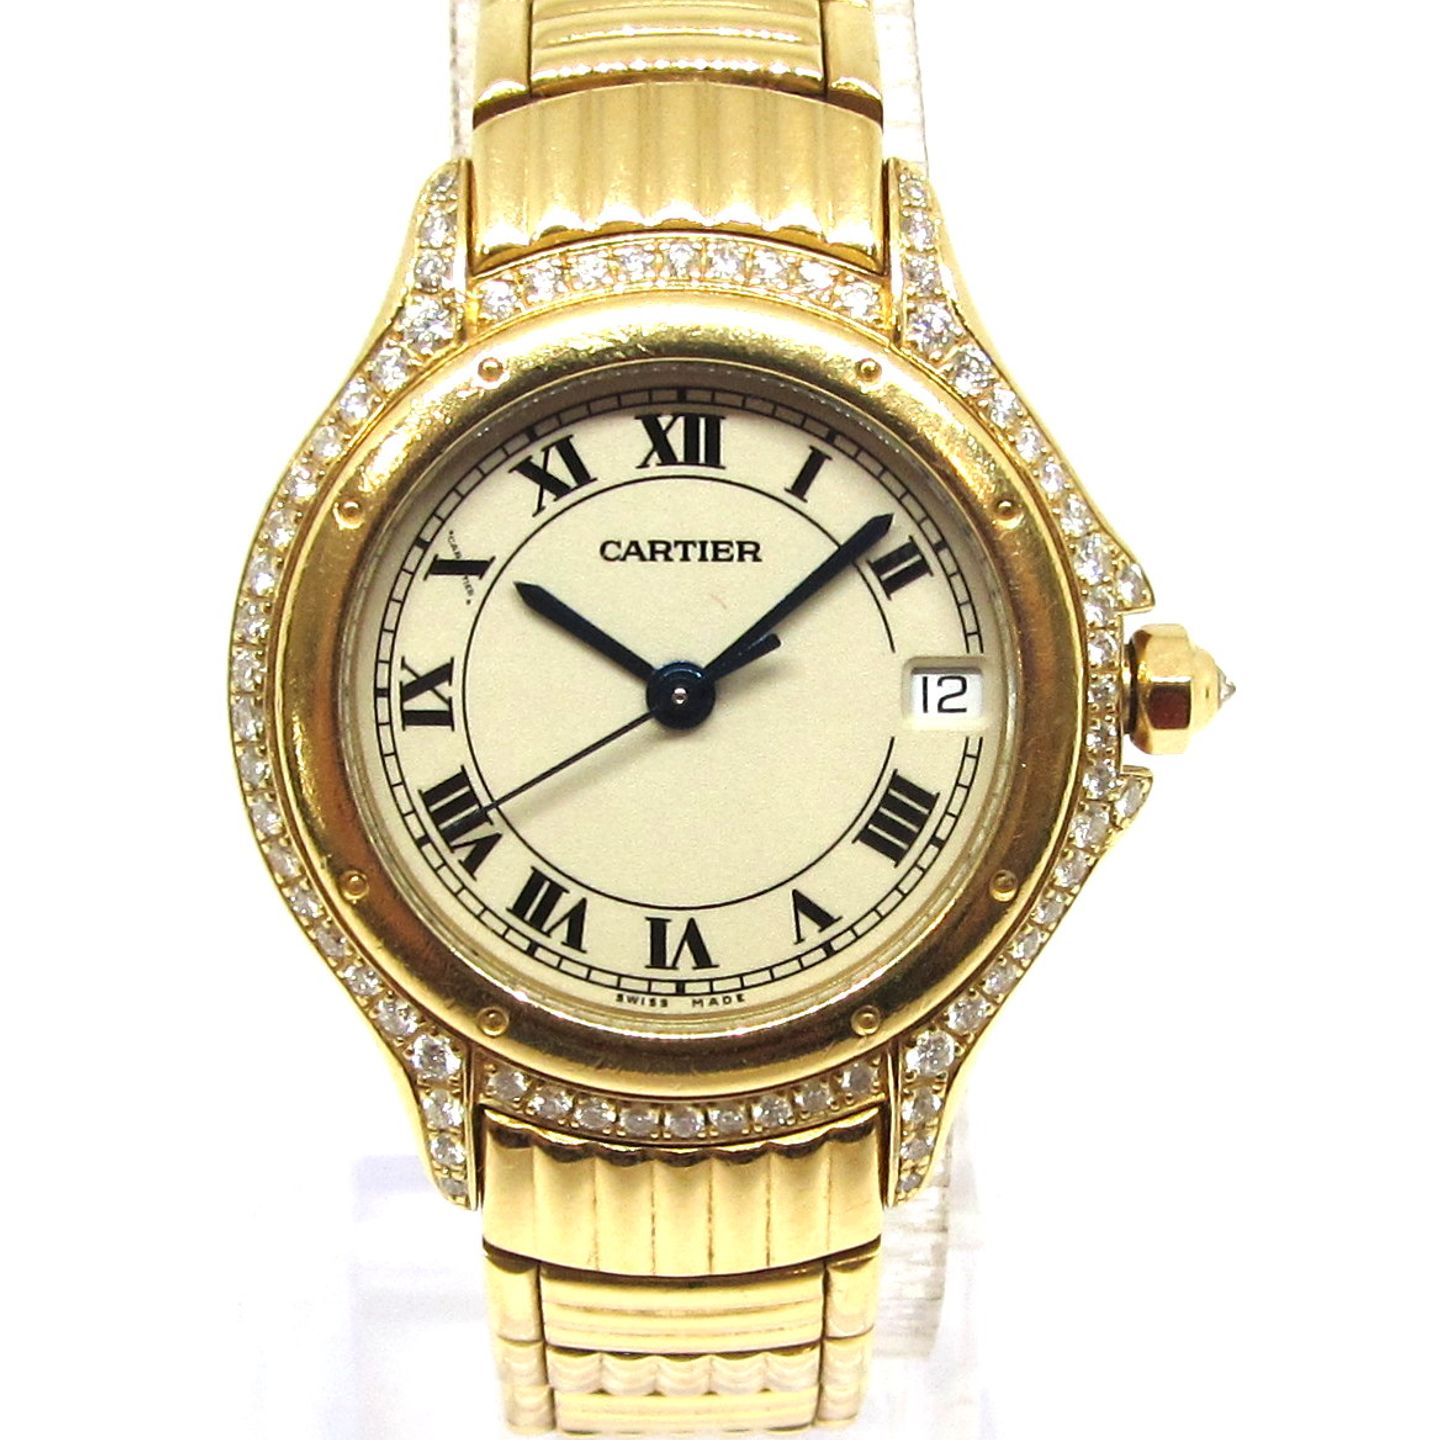 Cartier Cougar Unknown (Unknown (random serial)) - Champagne dial 26 mm Yellow Gold case (1/6)